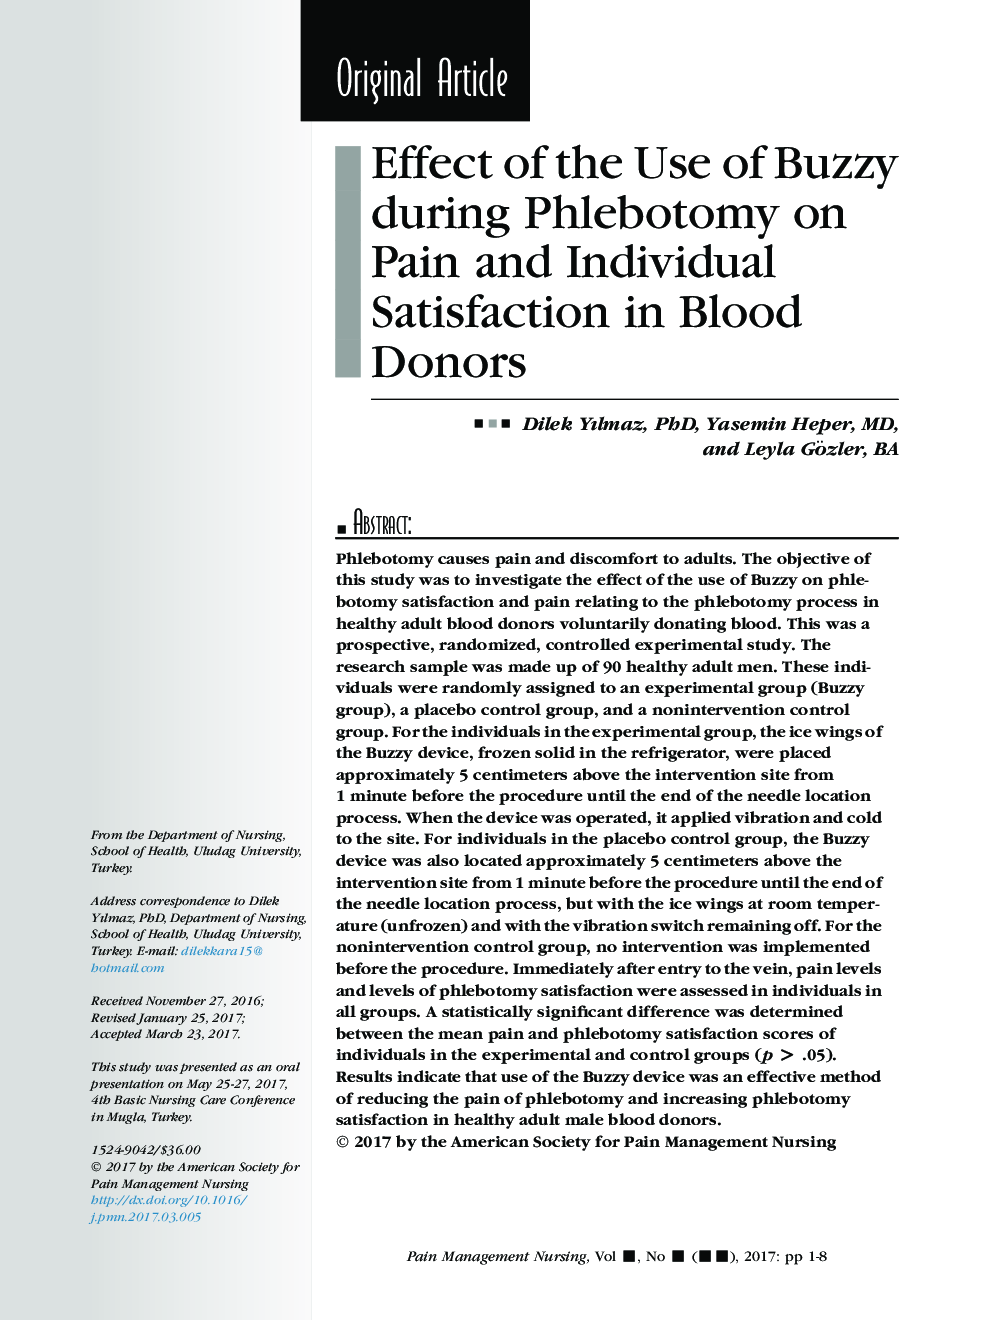 Effect of the Use of Buzzy® during Phlebotomy on Pain and Individual Satisfaction in Blood Donors